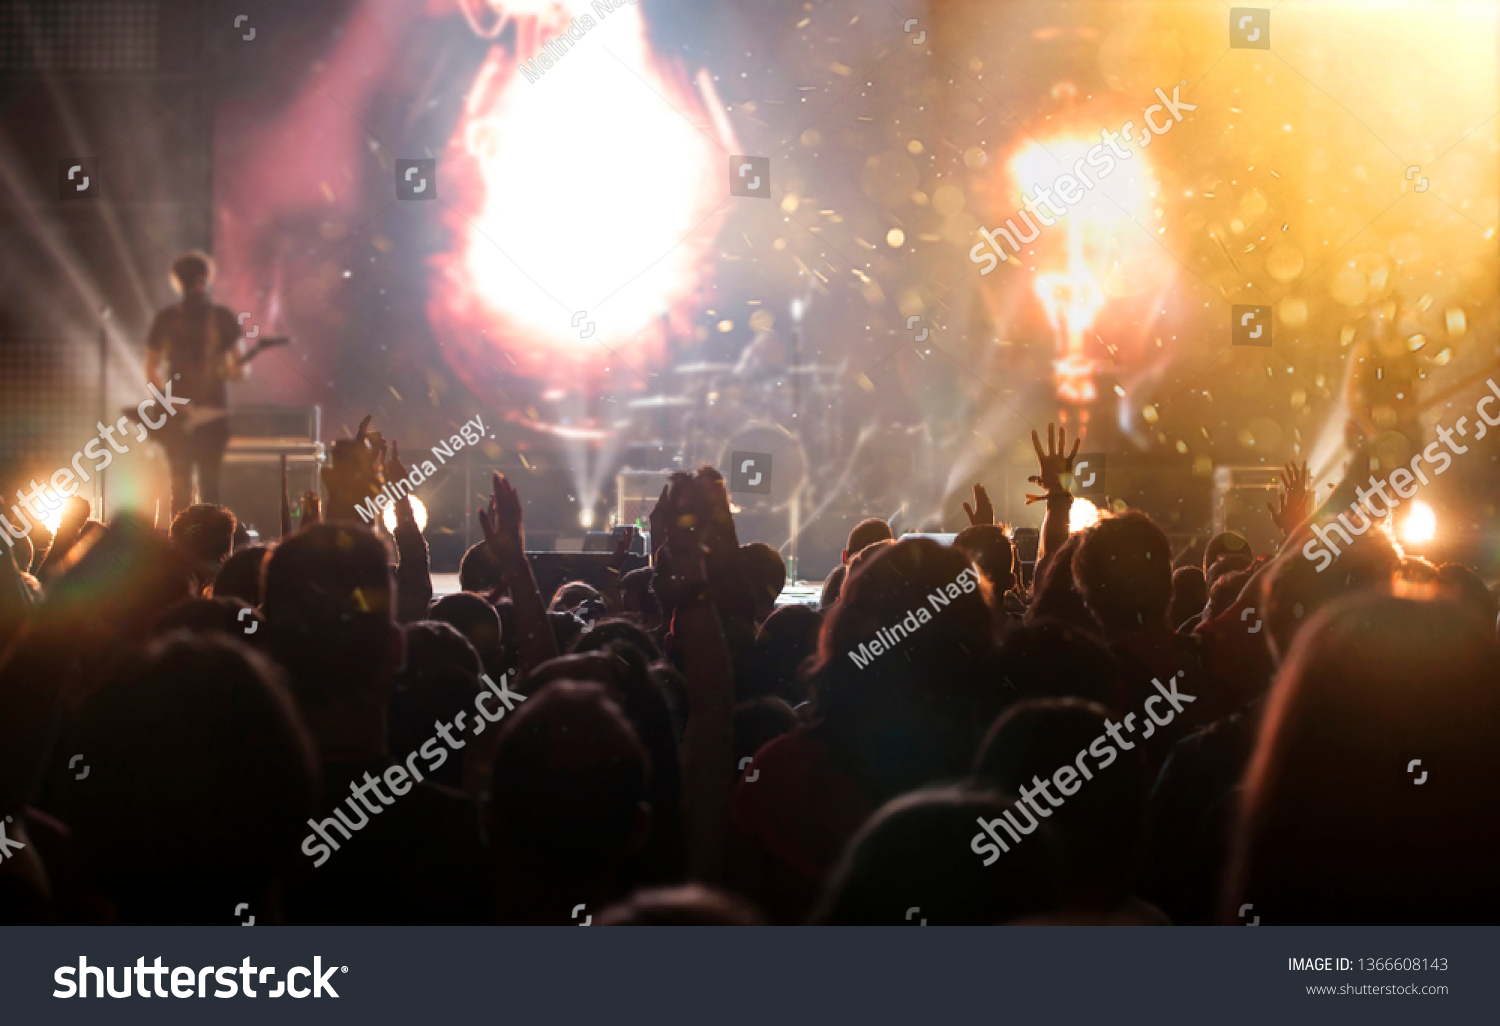 Crowd at concert - Cheering crowd in bright colorful stage lights #1366608143